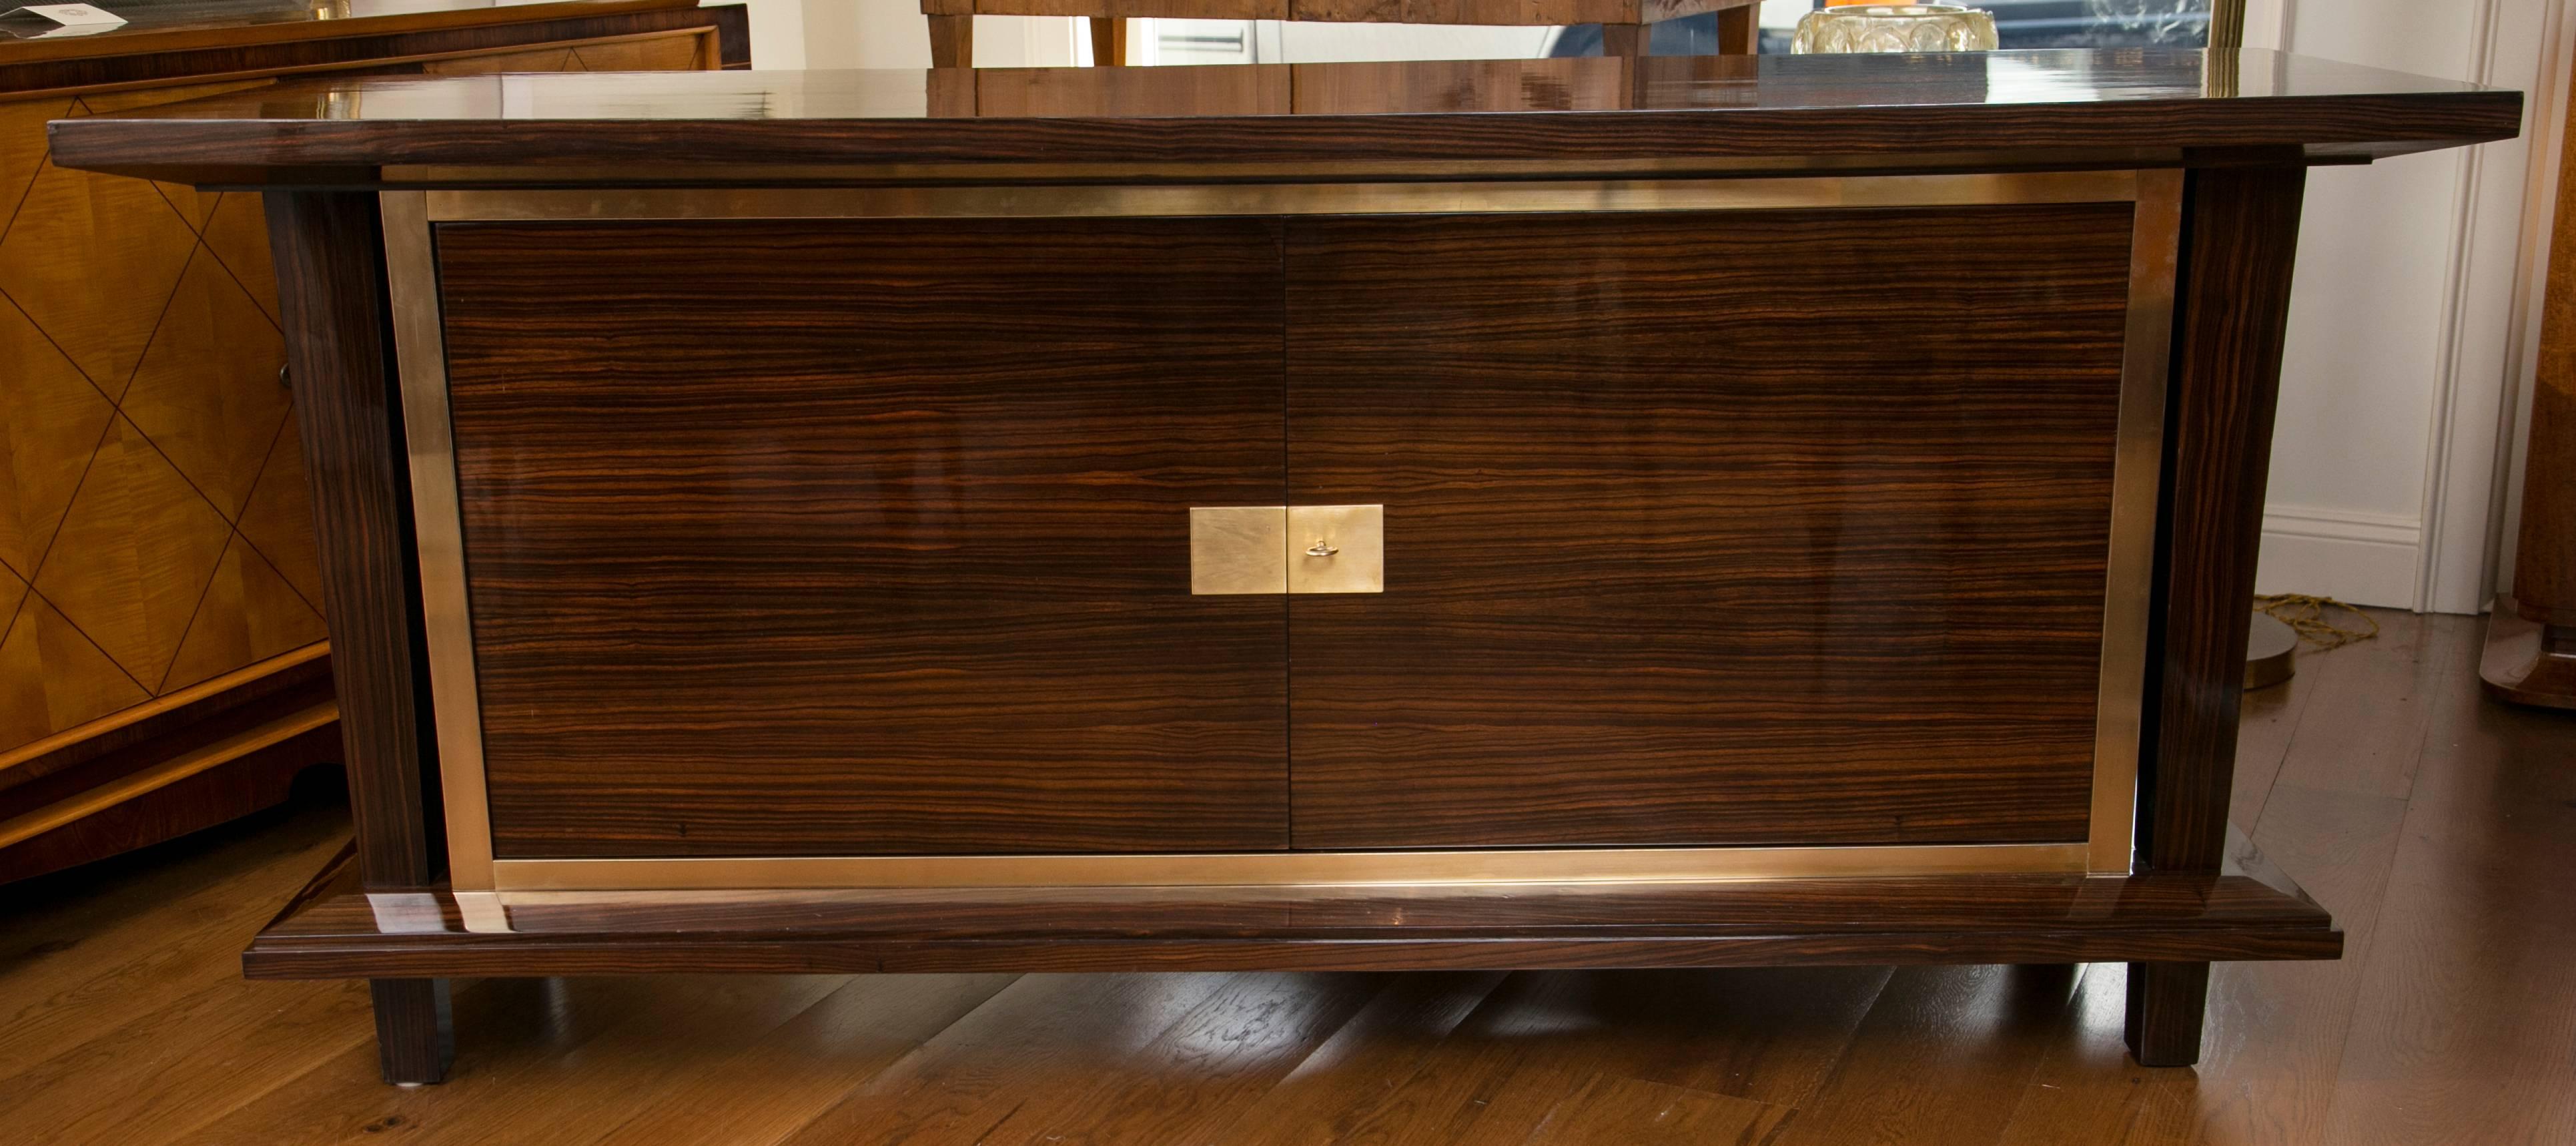 Streamline two-door sideboard flanked by graduated side columns in an elegant rosewood veneer adorned with brass inlay and hardware, interior veneered in sycamore, extraordinary quality, French polished.
Origin
France
Creation